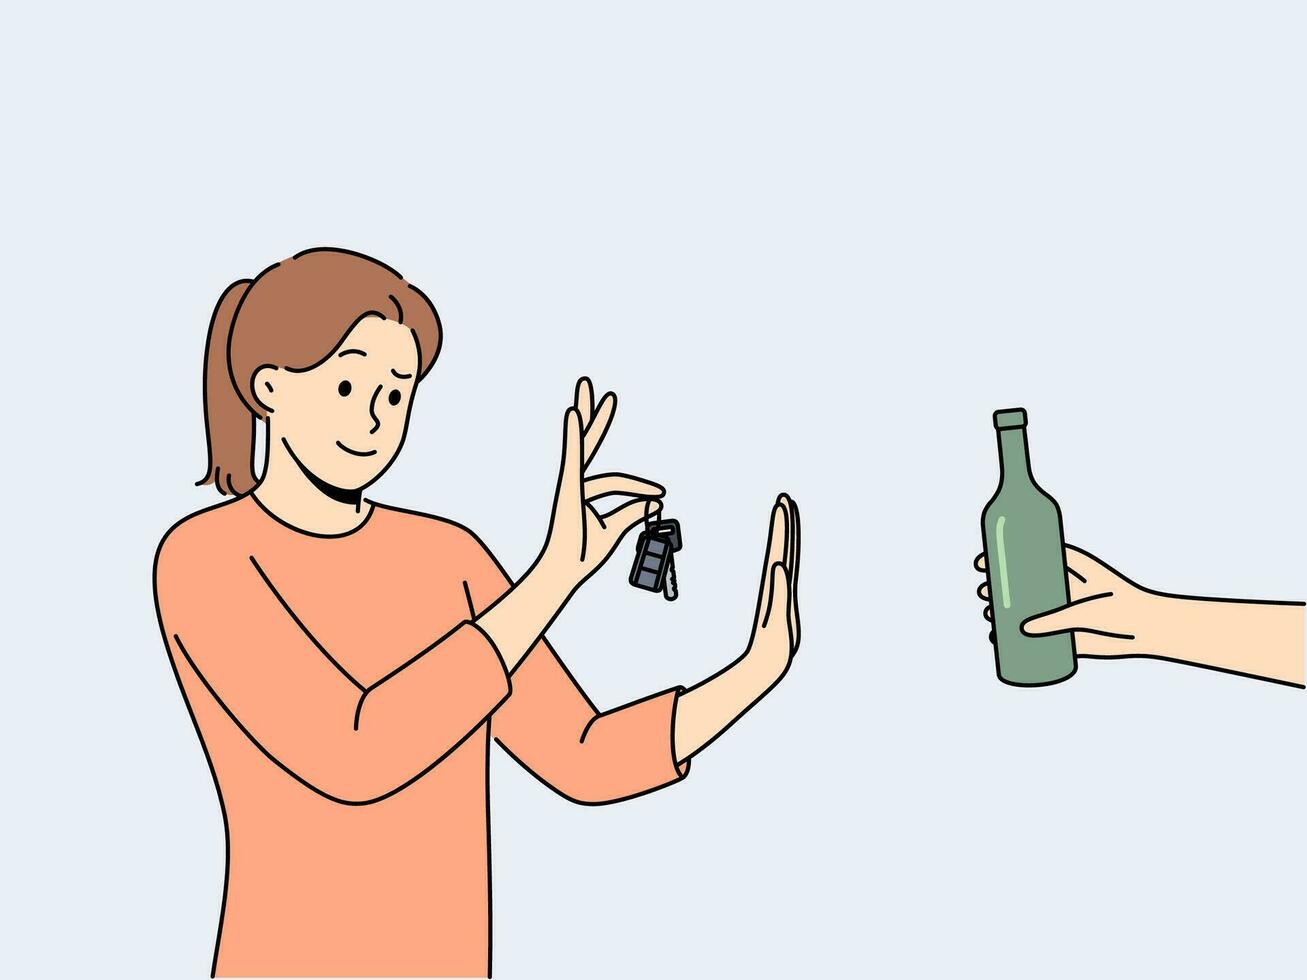 Woman driver refuses alcohol and holds car keys standing near human hand with bottle of beer. Concept of sobriety and awareness of driver who does not want to drive after drinking alcohol vector